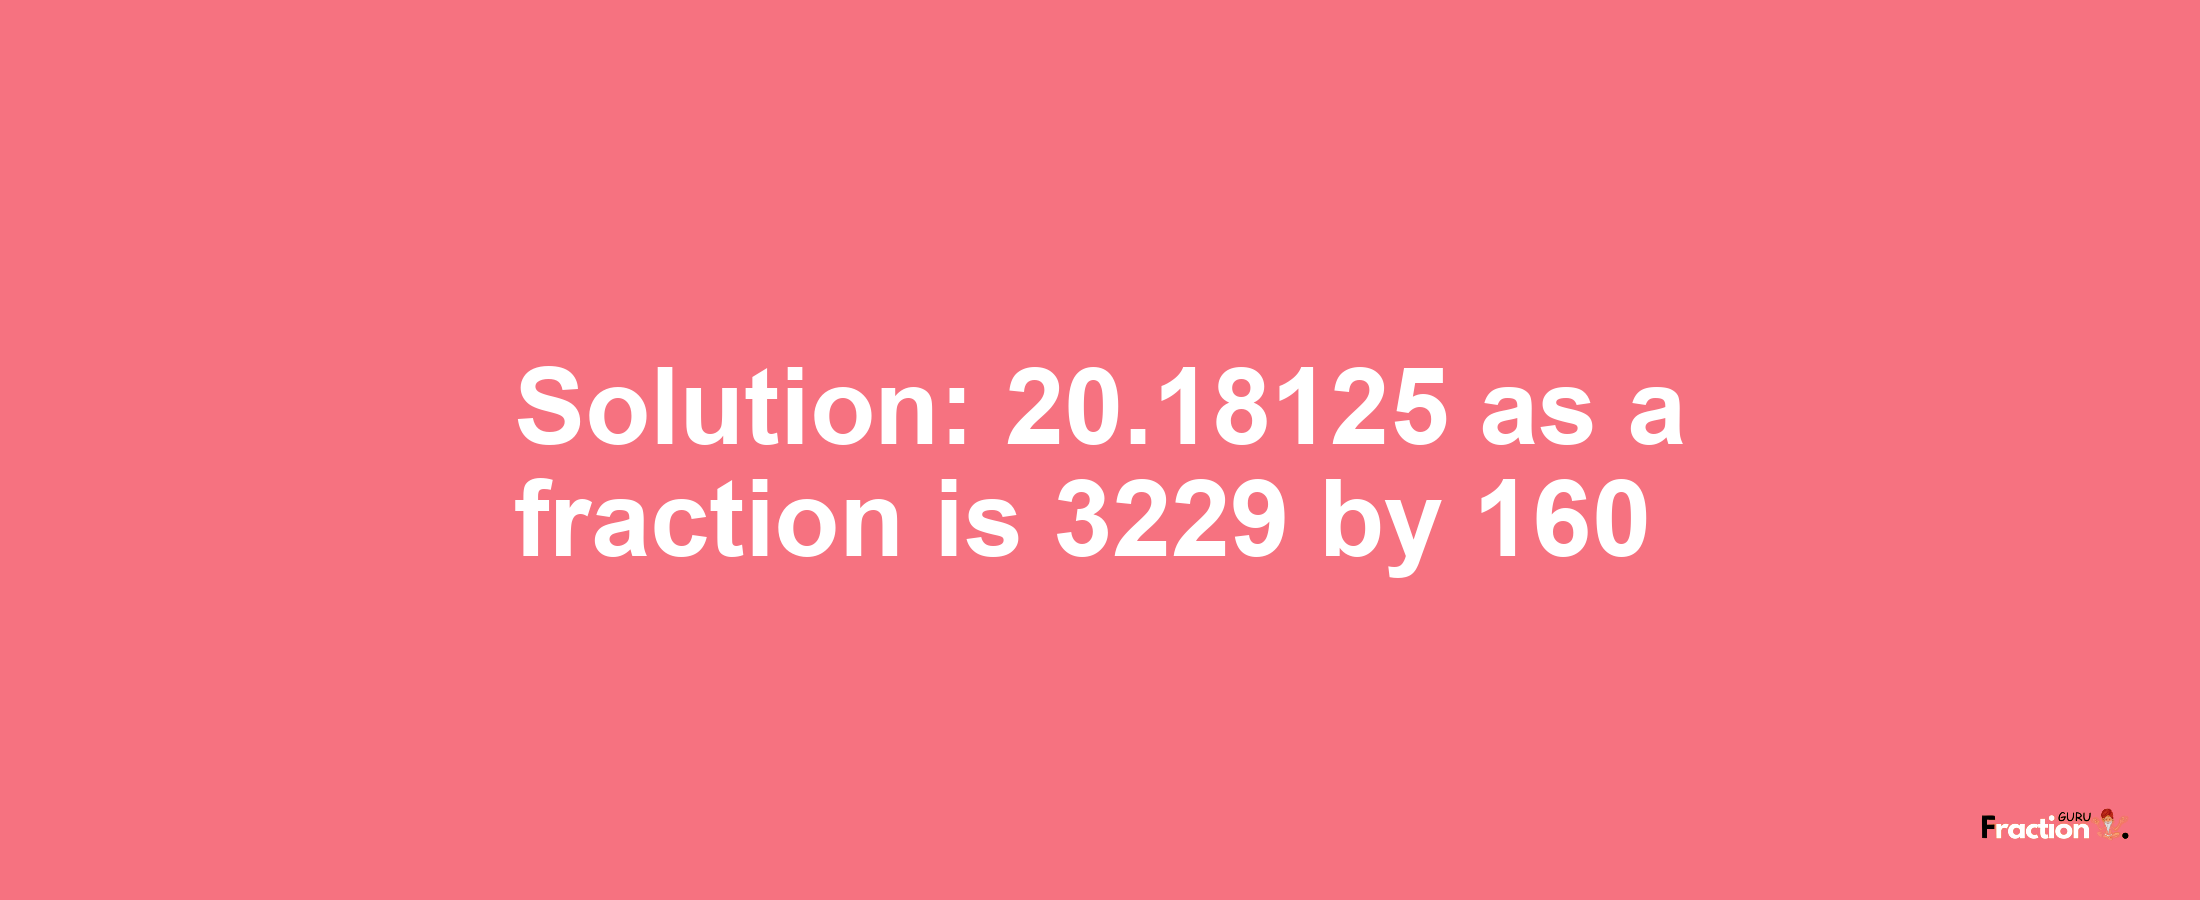 Solution:20.18125 as a fraction is 3229/160